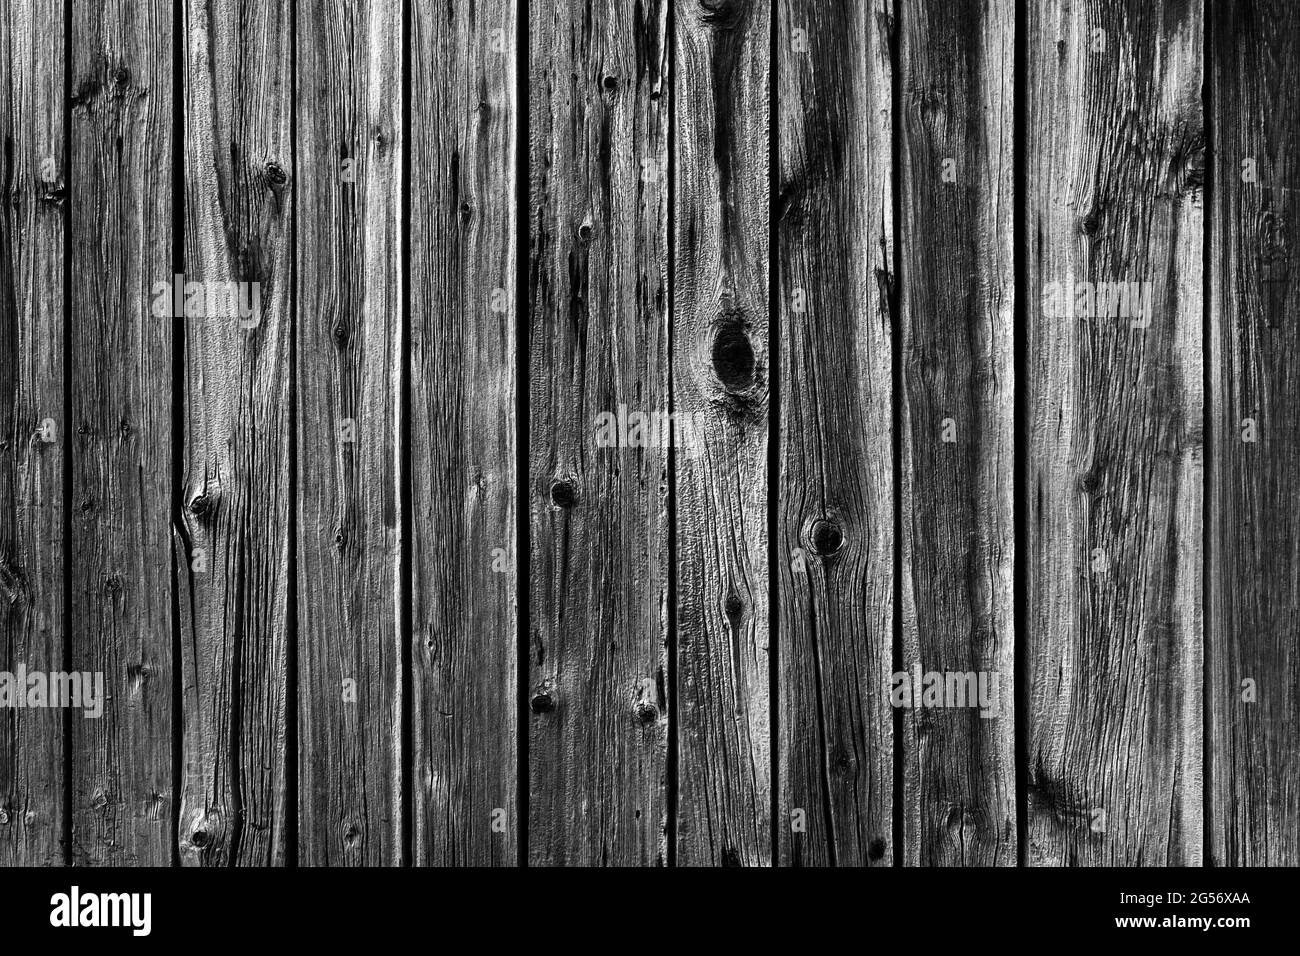 Black and white background photo of an old worn wooden fence made of planks. Stock Photo